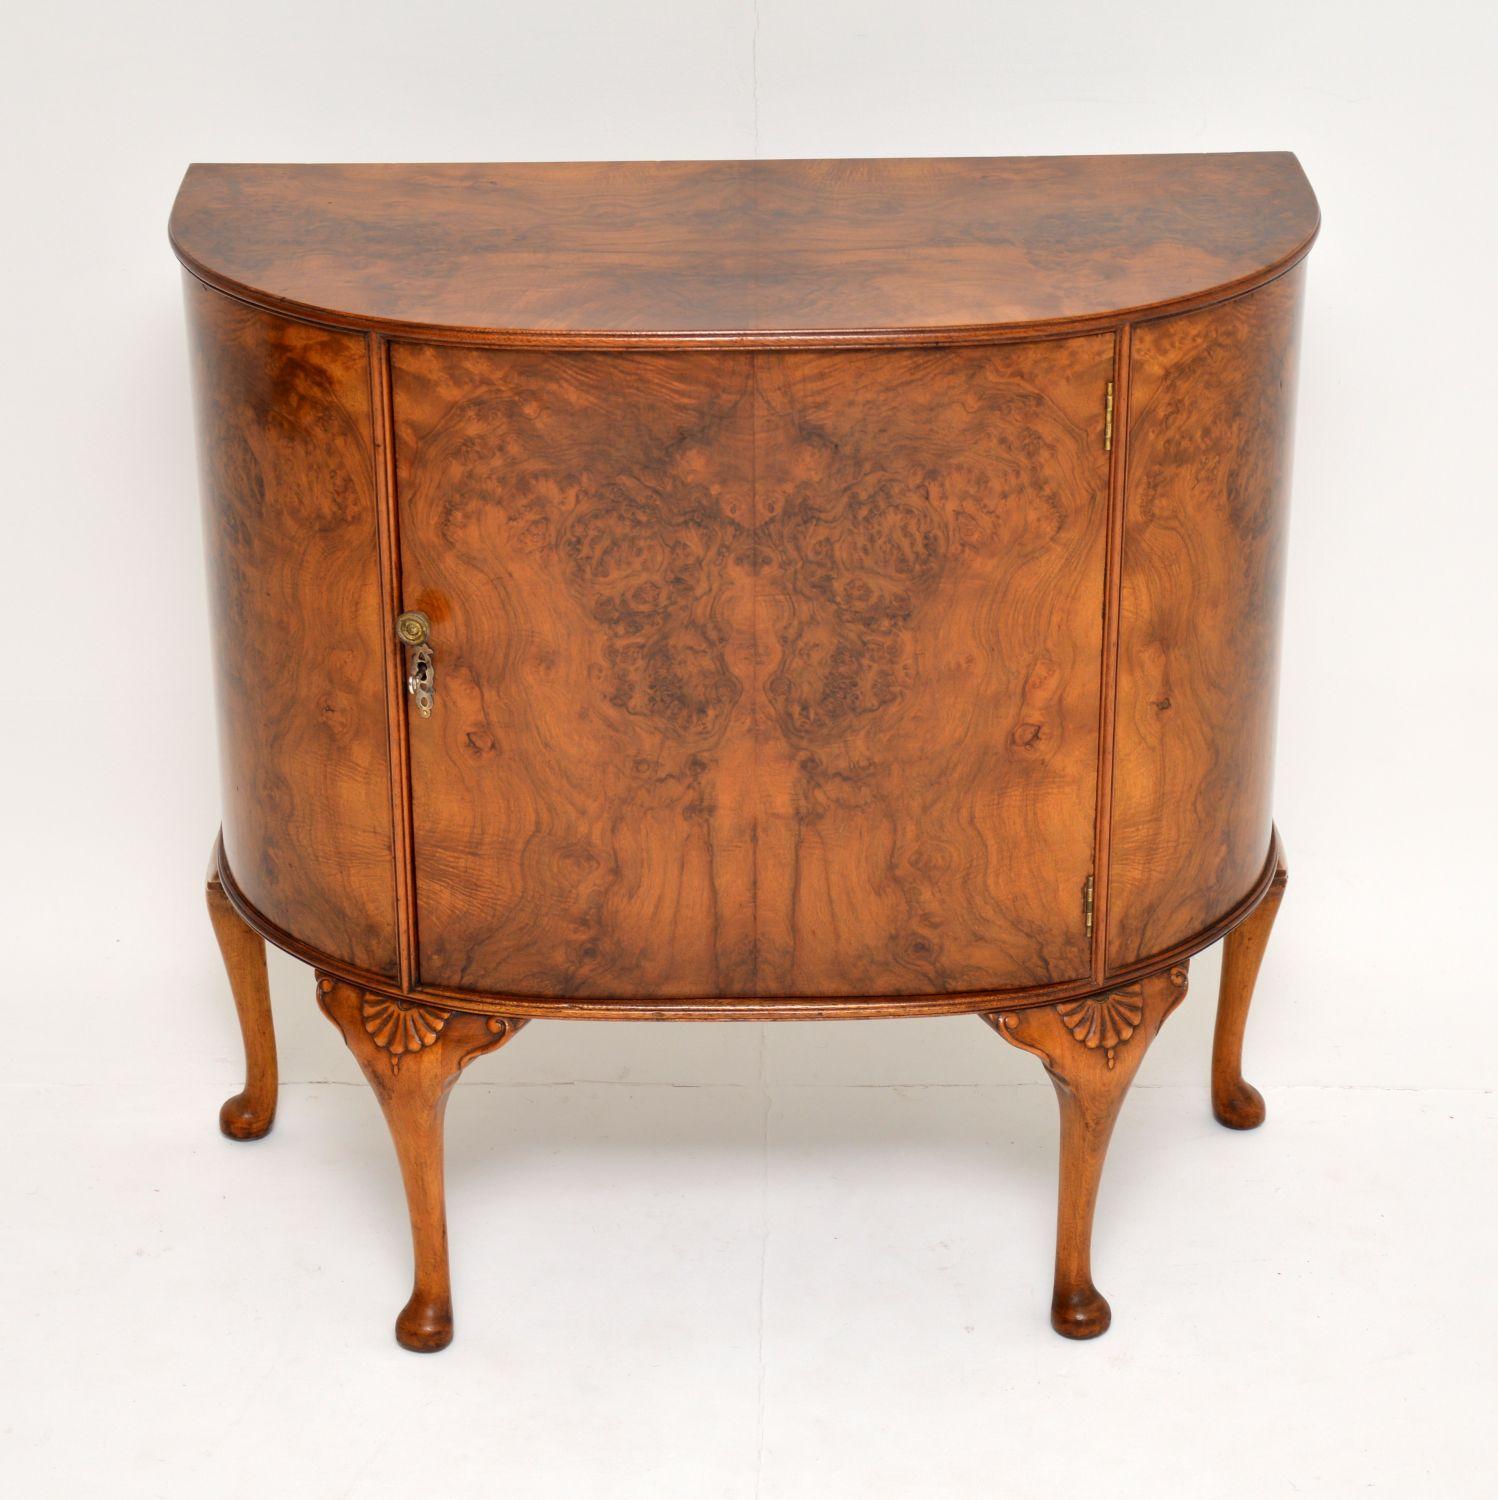 This antique burr walnut cabinet is a very useful item, because it takes up no more room than a side table, but has lots of storage inside.

It’s bow fronted and sits on solid walnut legs that are carved on the tops. There is lots of storage